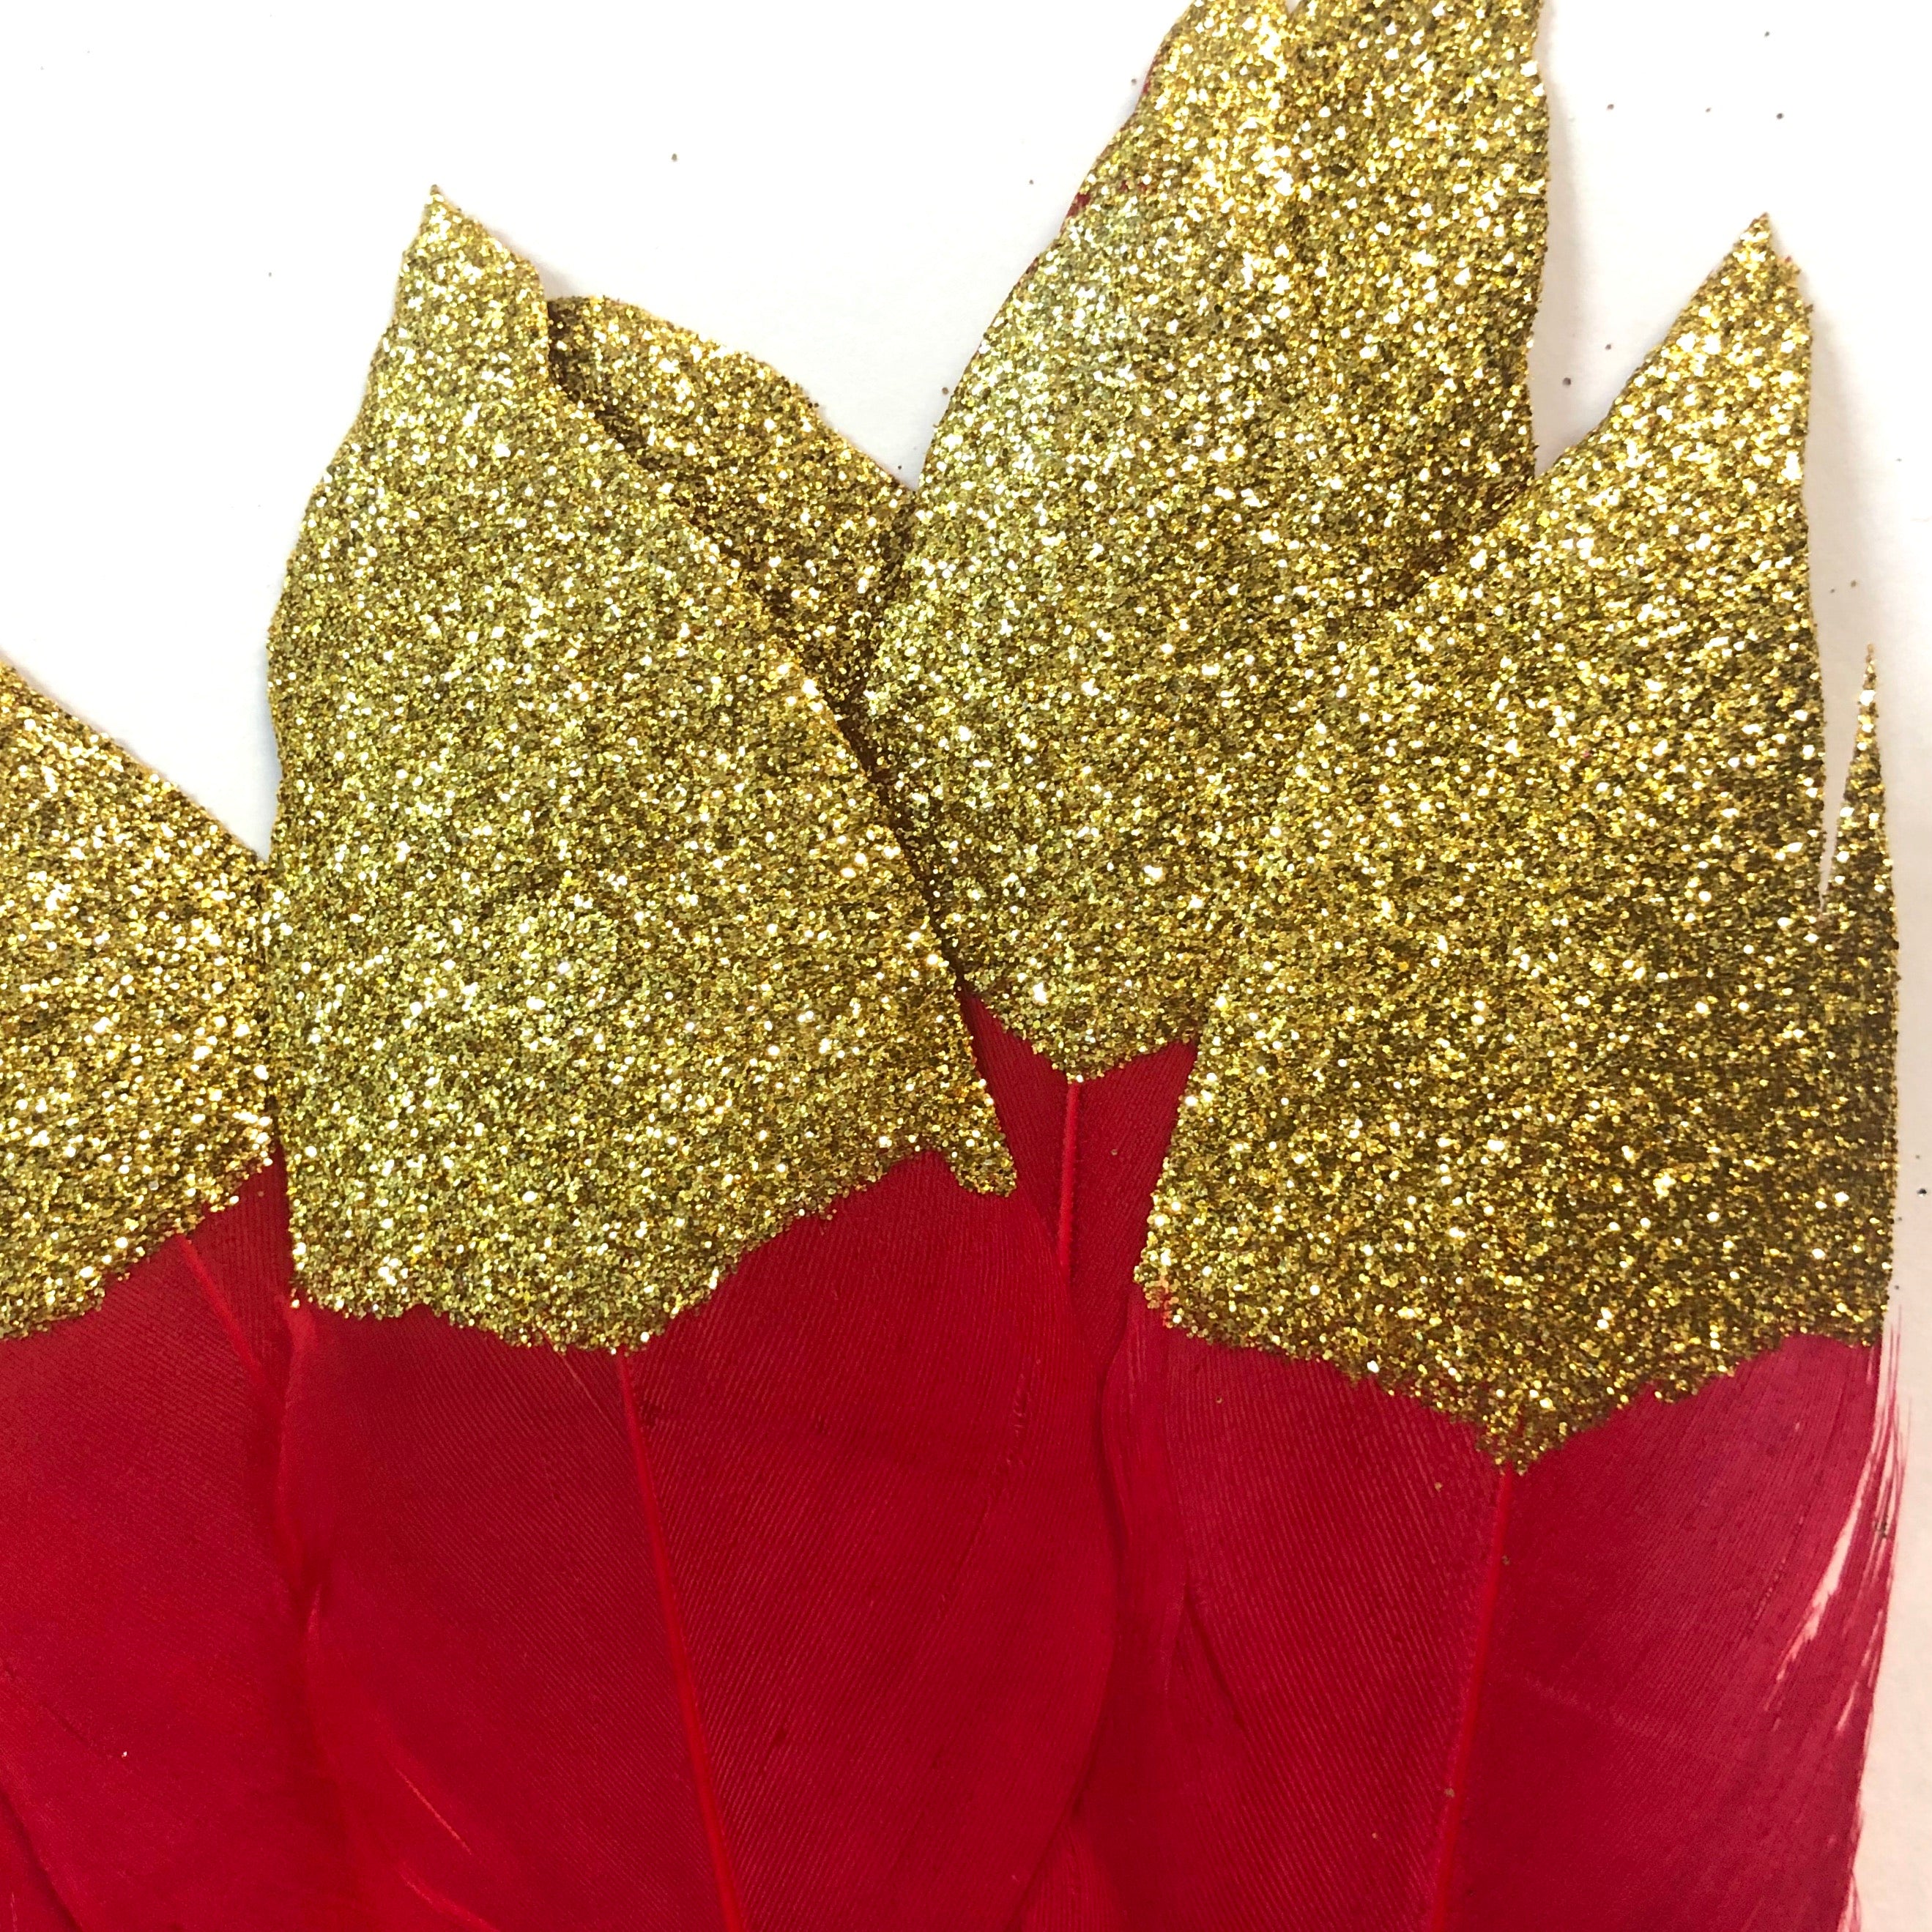 Goose Pointer Feather Gold Glitter Tipped x 10 pcs - Red - Style 26